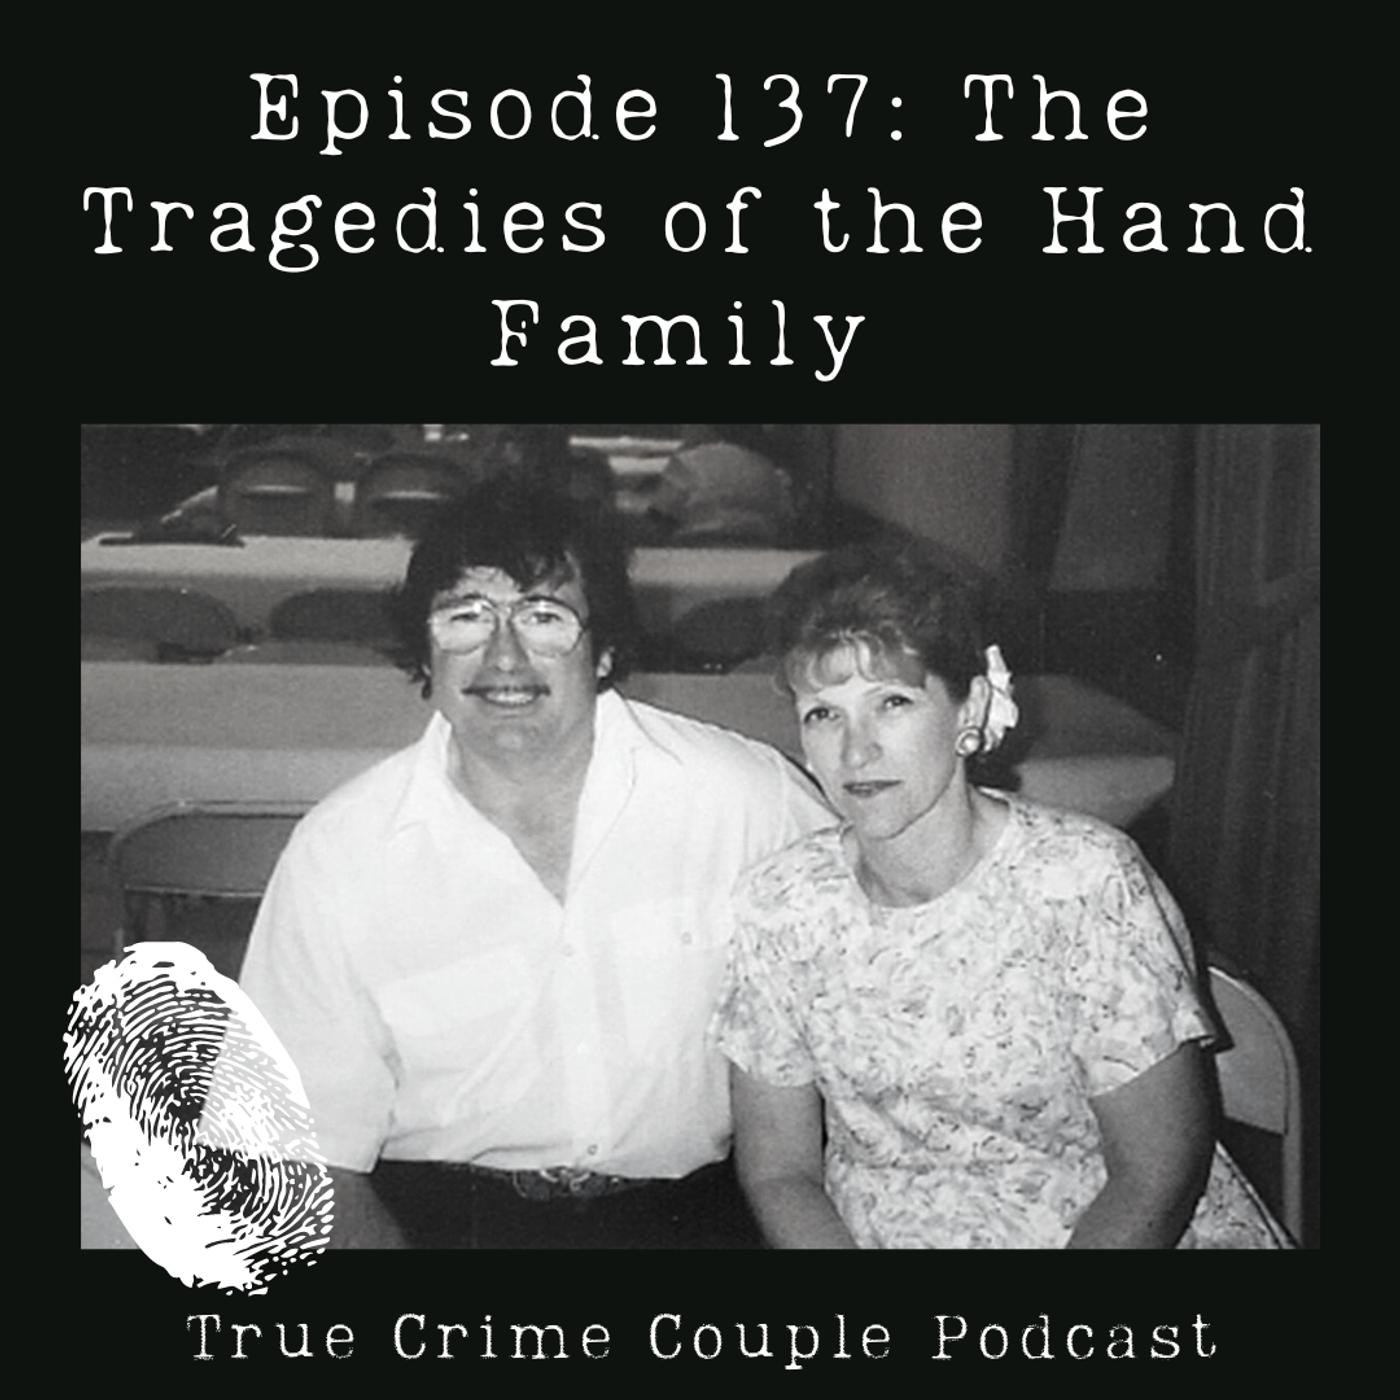 Episode 137: The Tragedies of the Hand Family